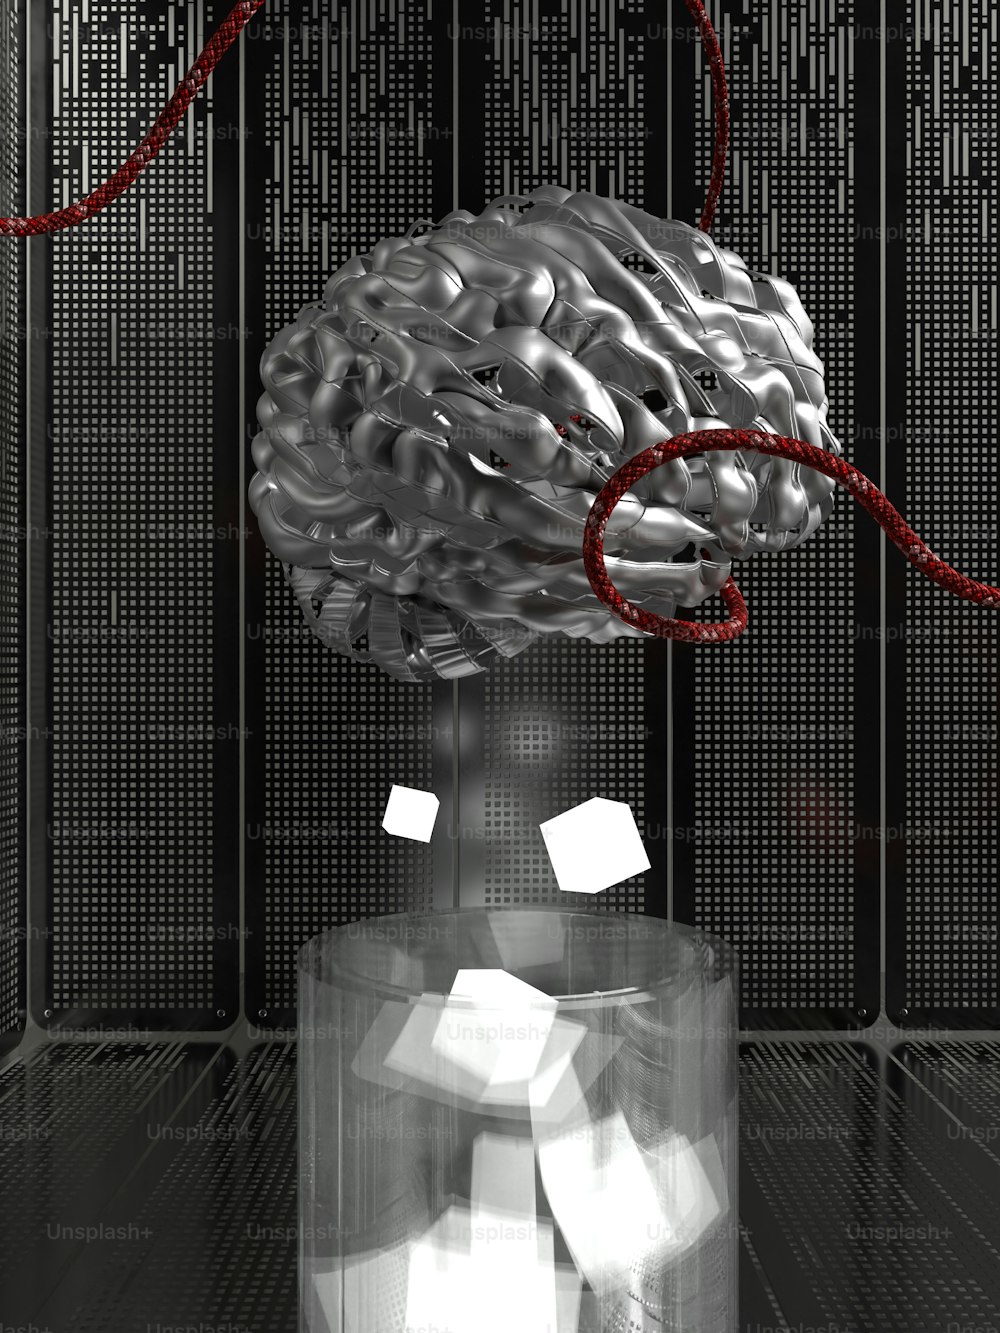 a brain in a glass container with a red cord